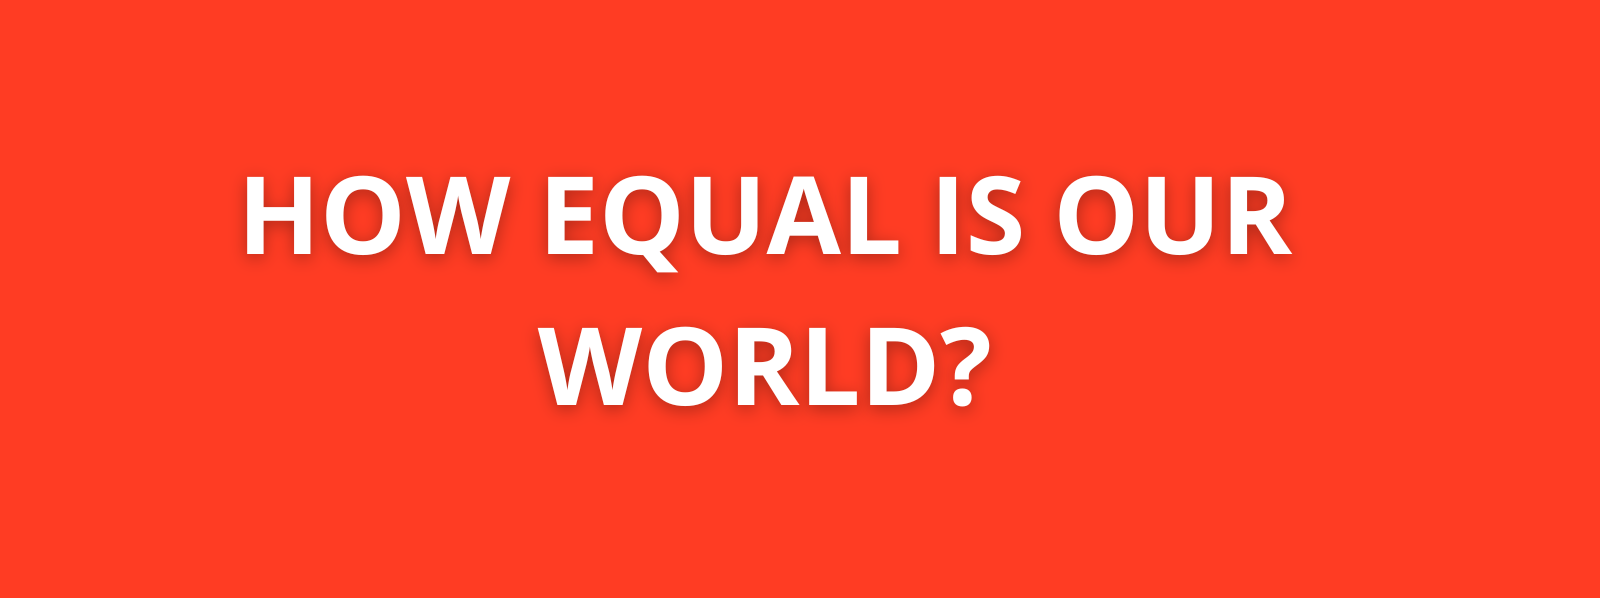 How equal is our world? 